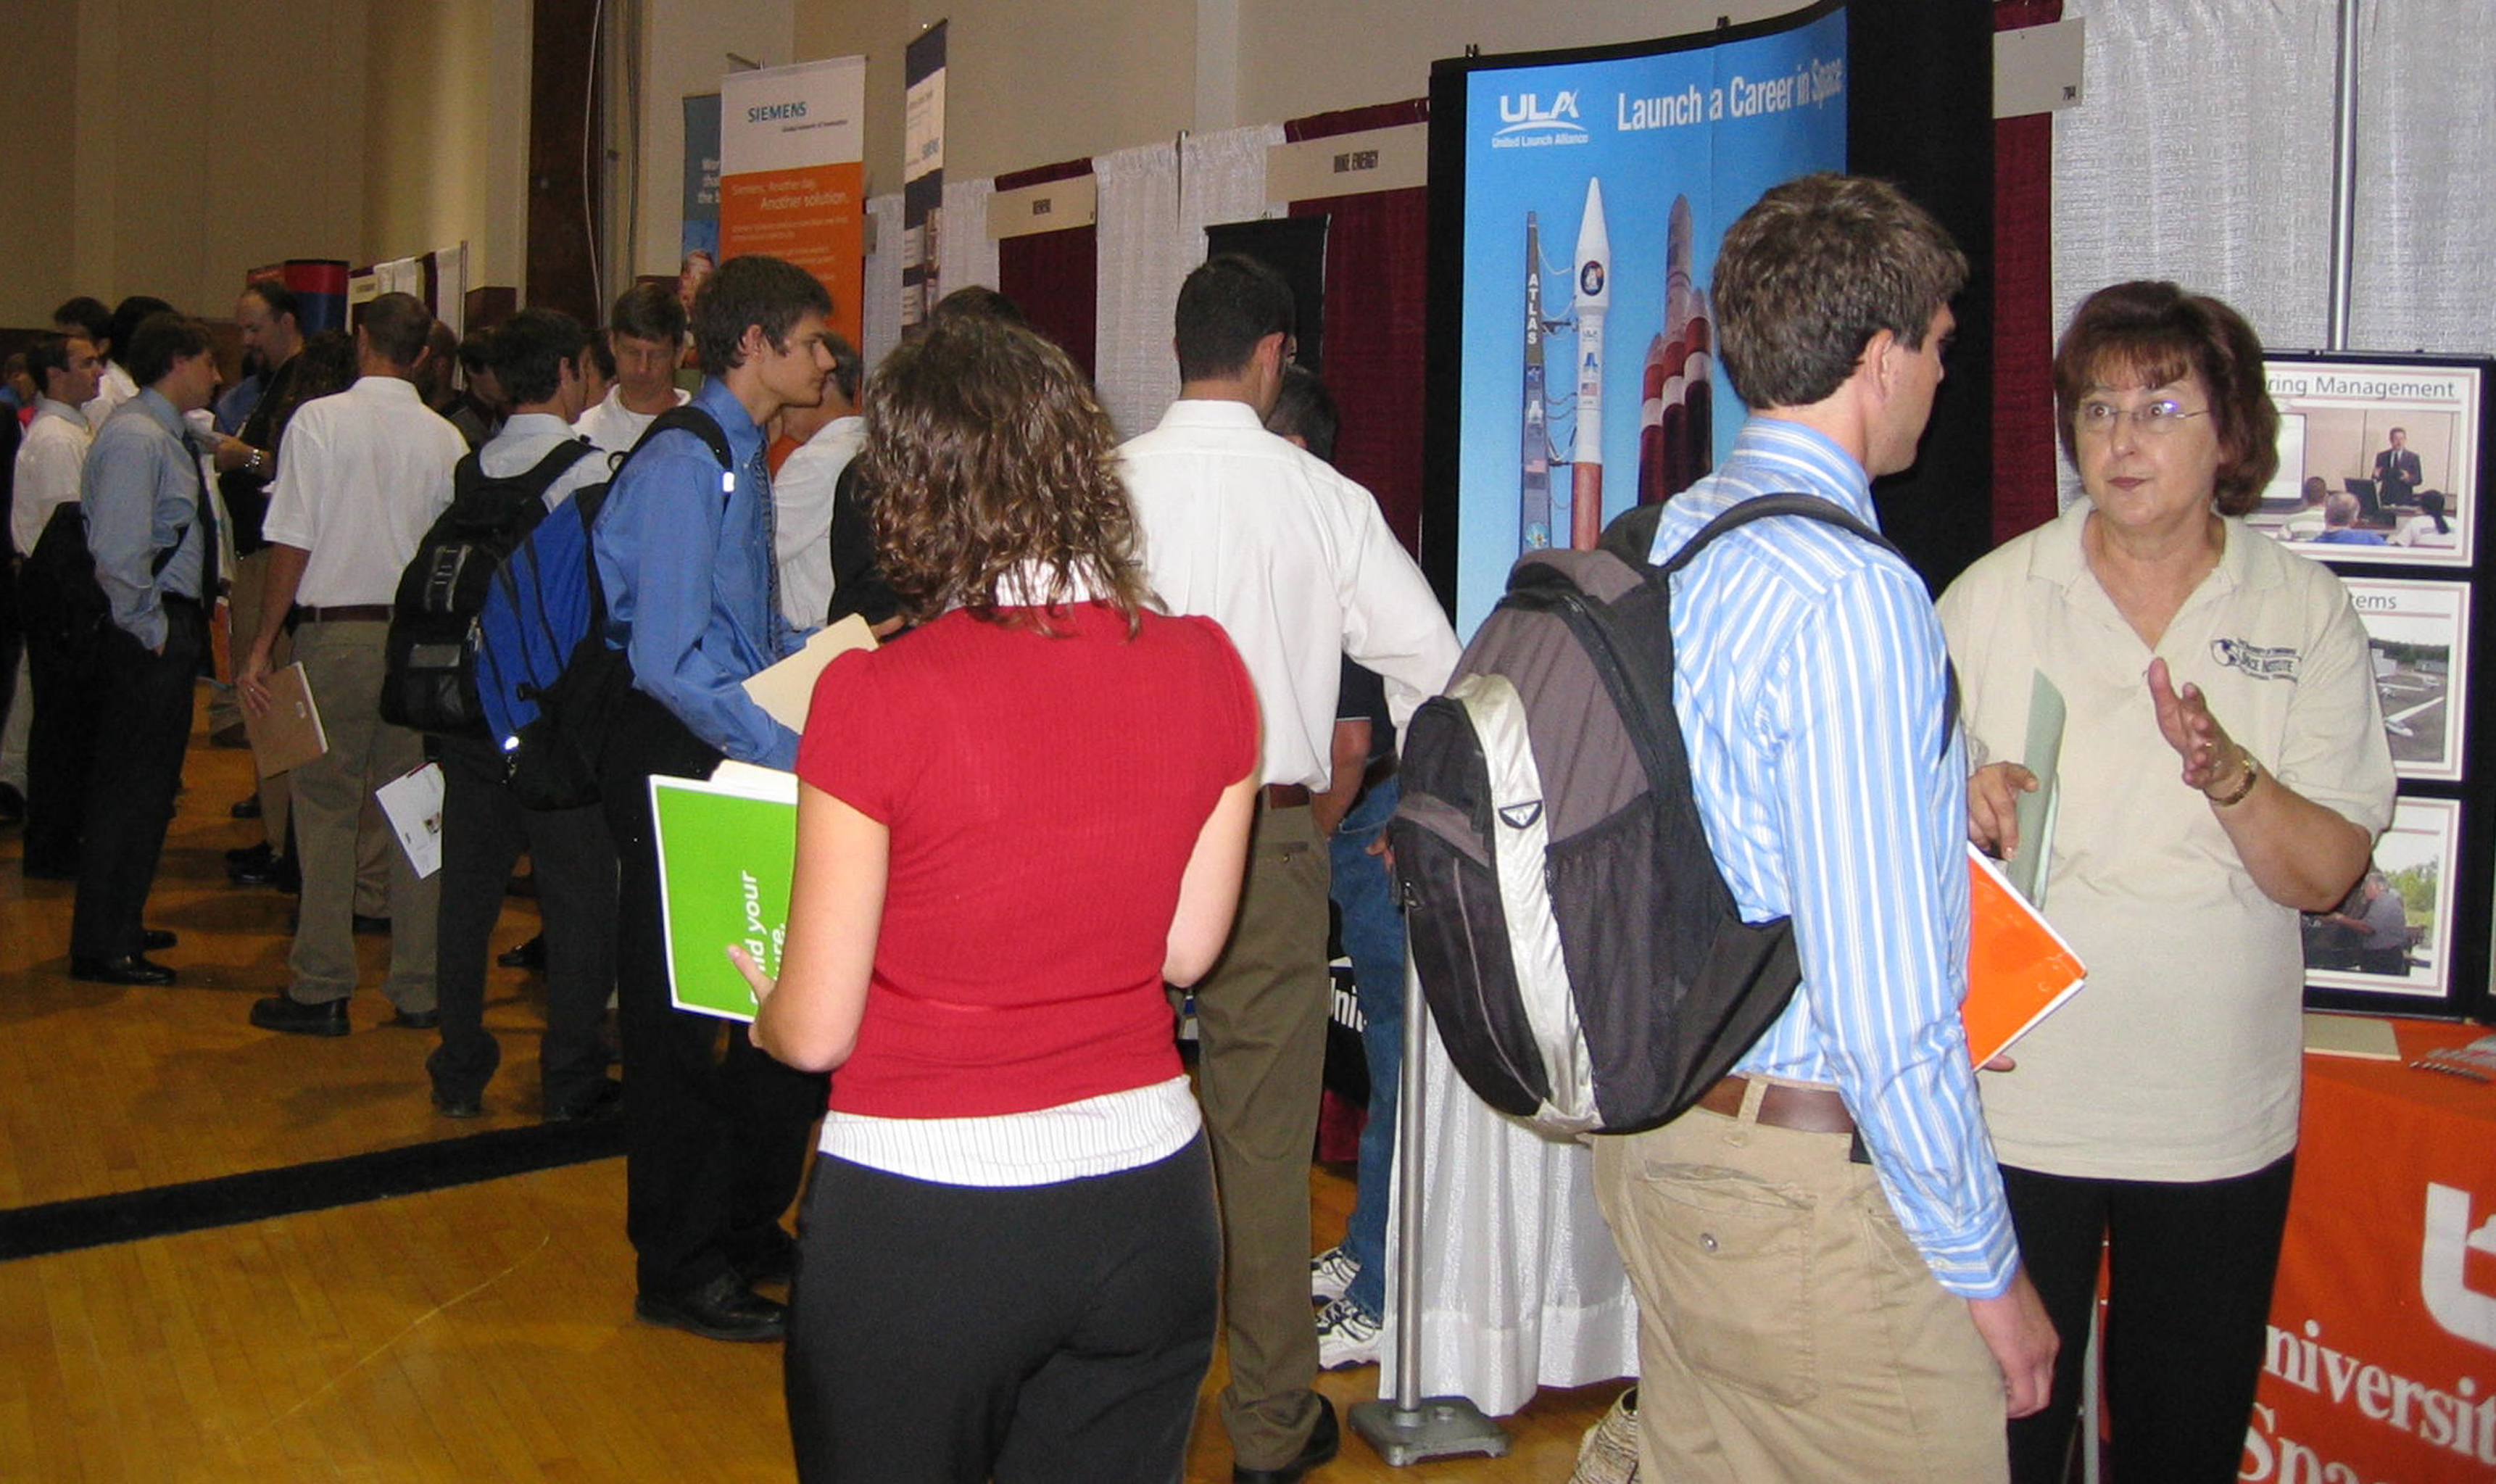 Engineering Expo booths